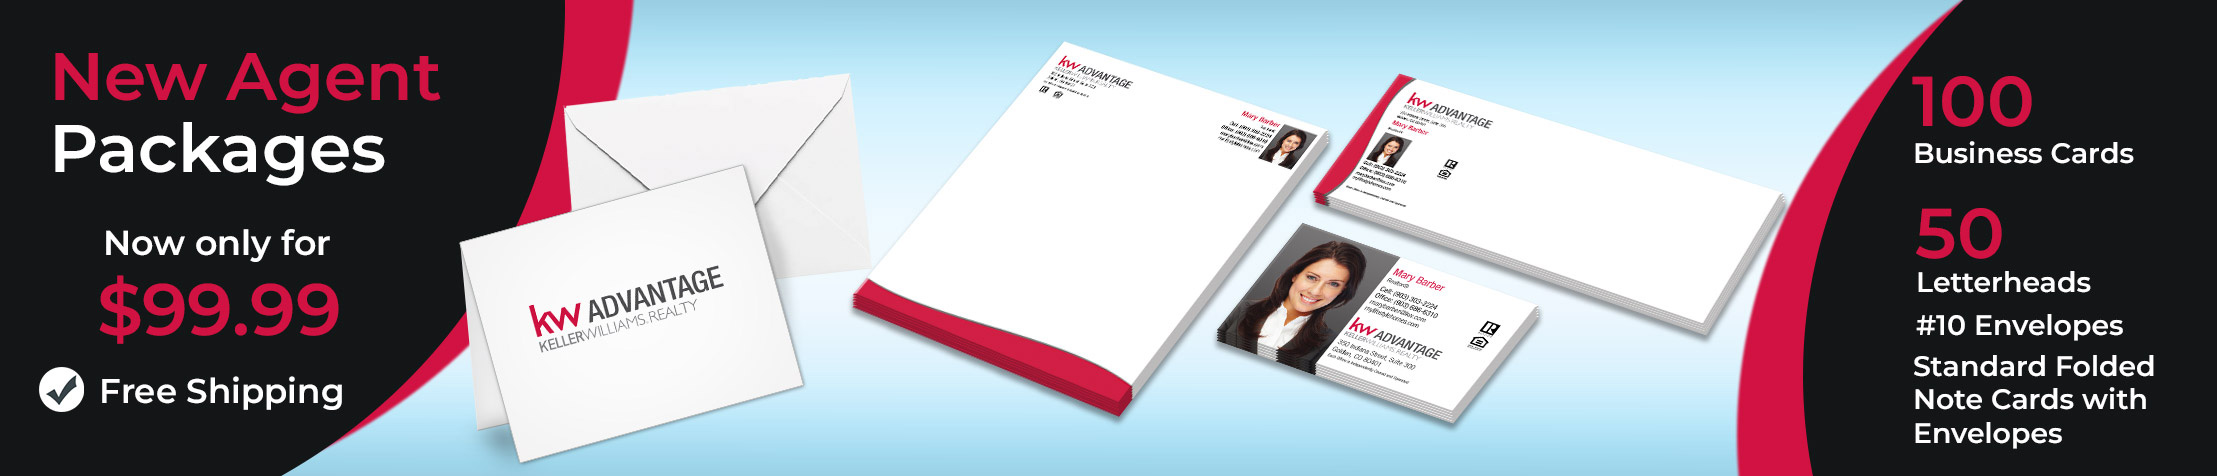 Keller Williams Real Estate New Agent Package - KW approved vendor personalized business cards, letterhead, envelopes and note cards with free shipping | BestPrintBuy.com